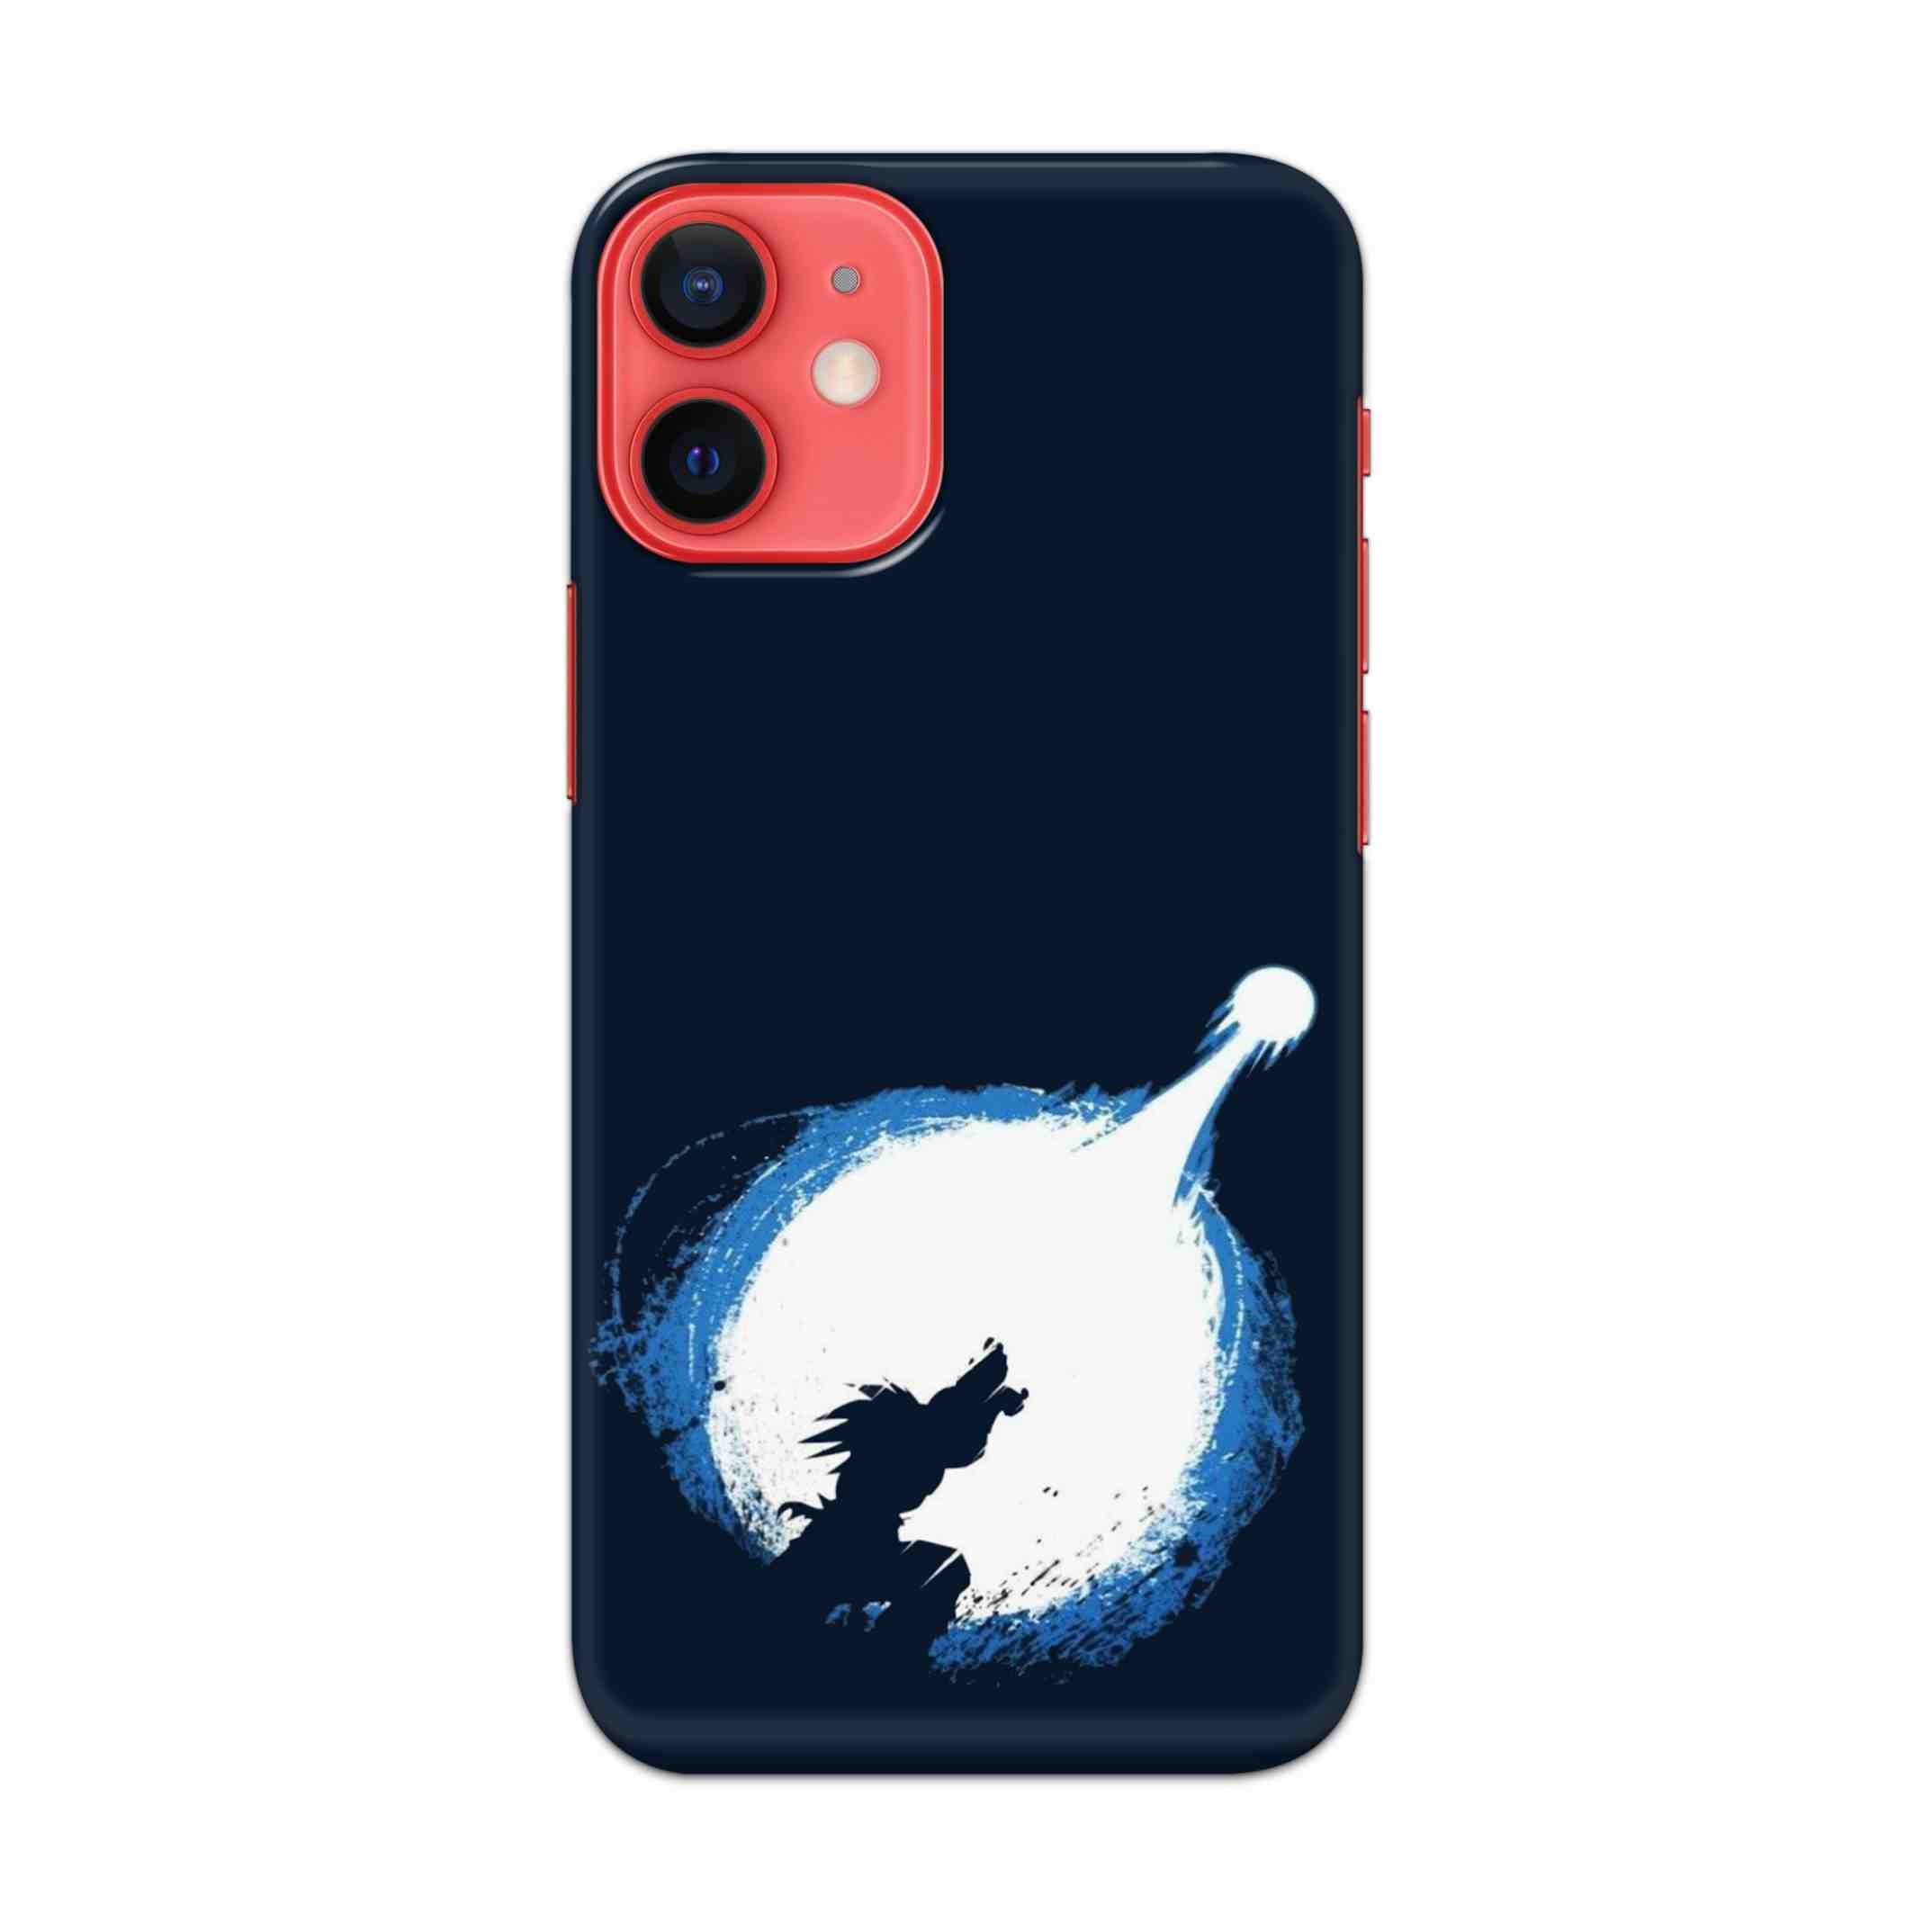 Buy Goku Power Hard Back Mobile Phone Case/Cover For Apple iPhone 12 mini Online